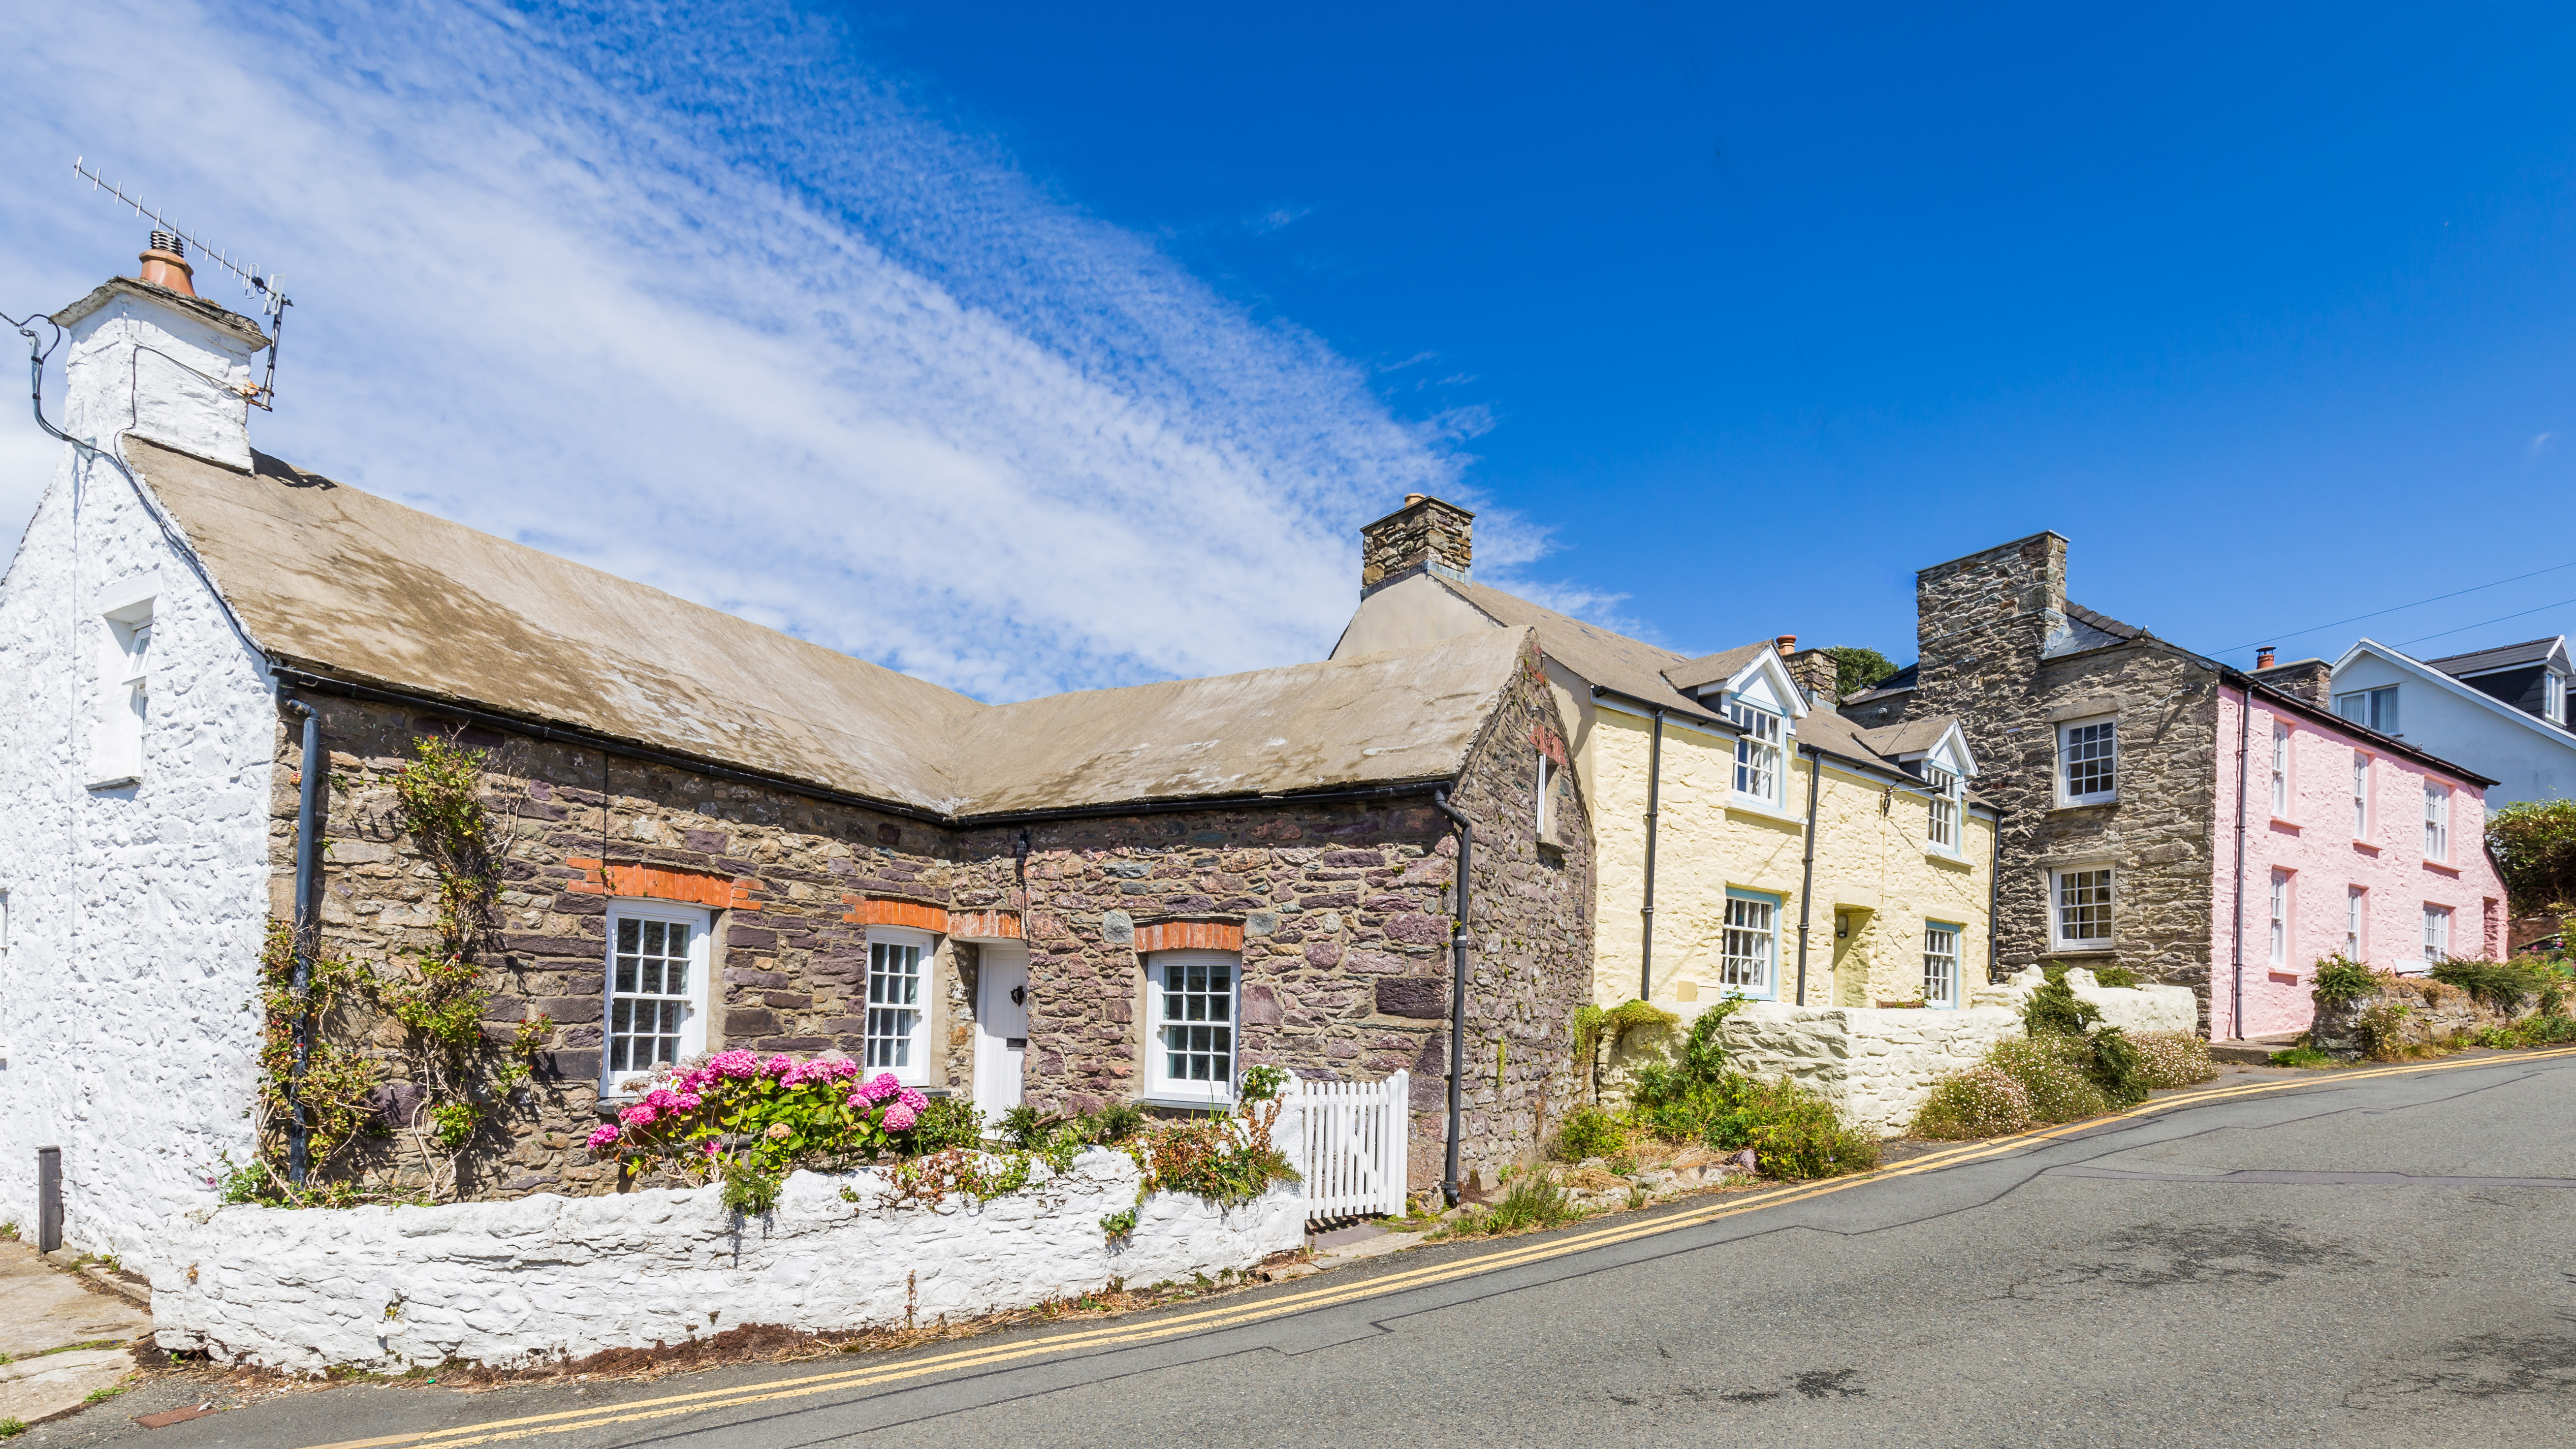 Colourful cottages in St Davids, Pembrokeshire